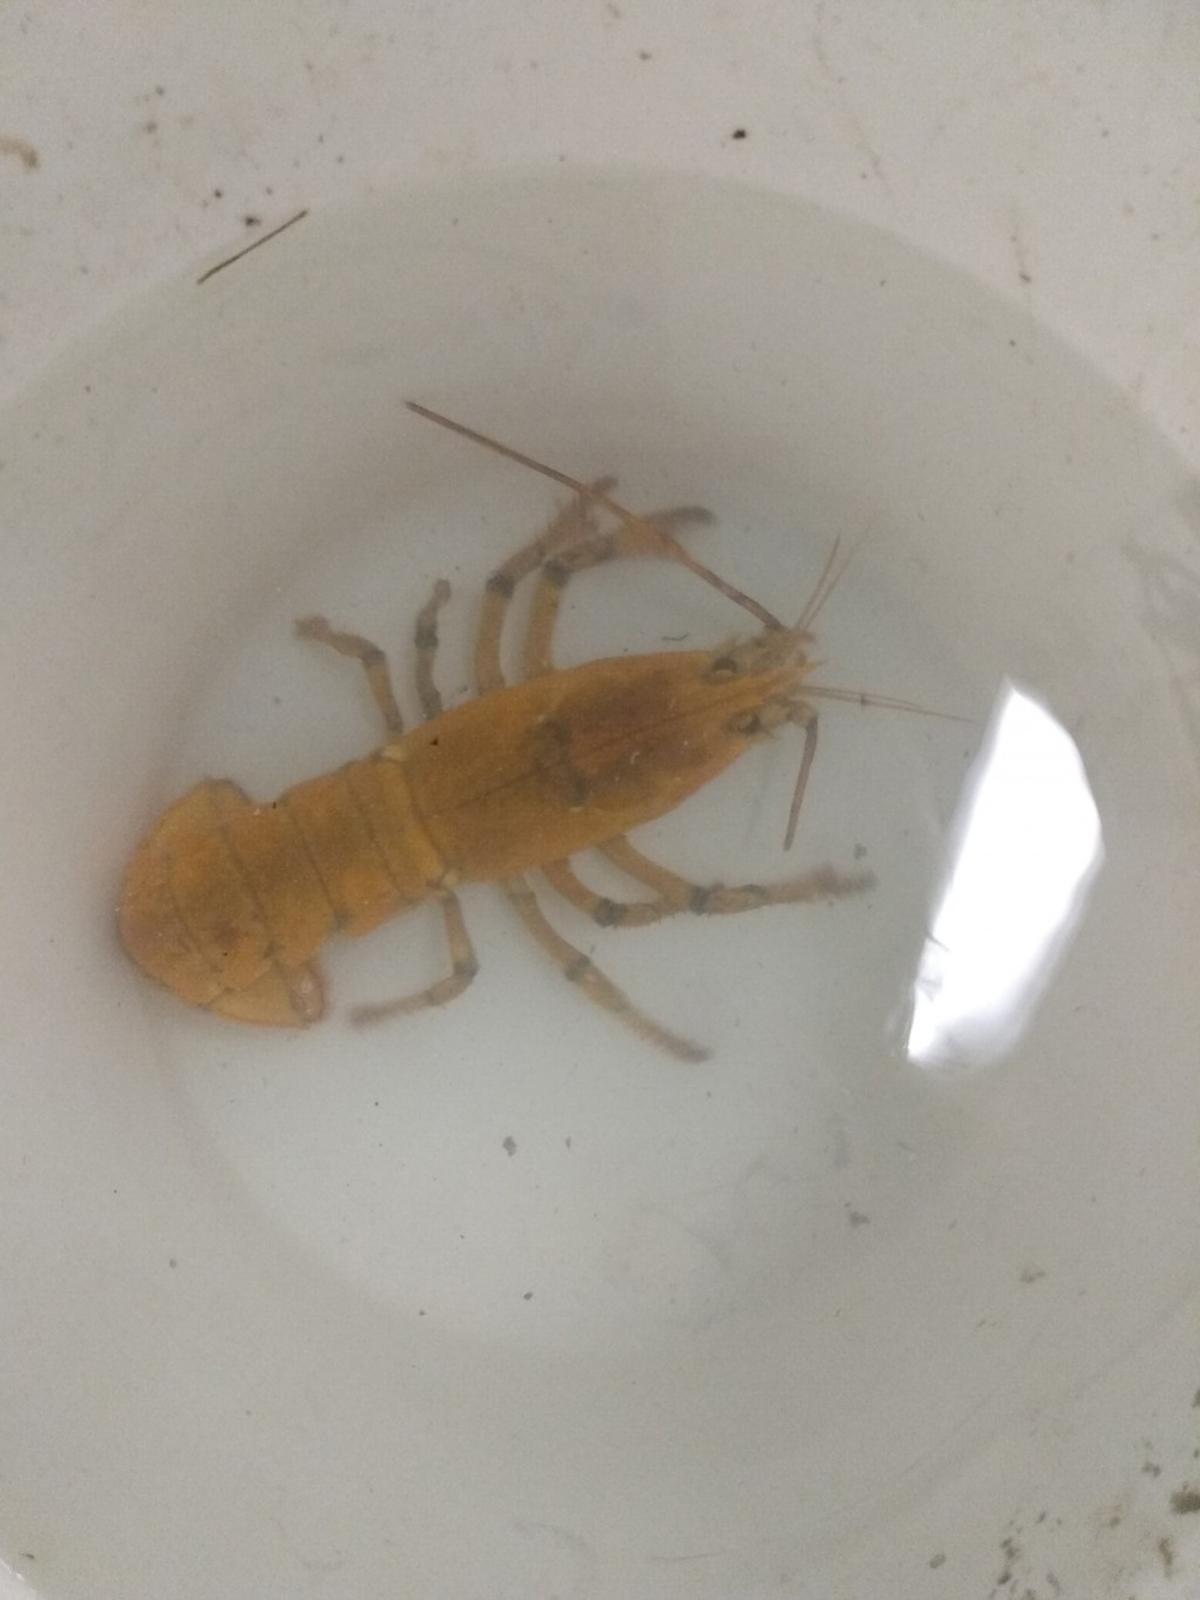 A rare yellow lobster has been caught off the coast of Maine and has been lovingly named "Banana." (Courtesy of University of New England)